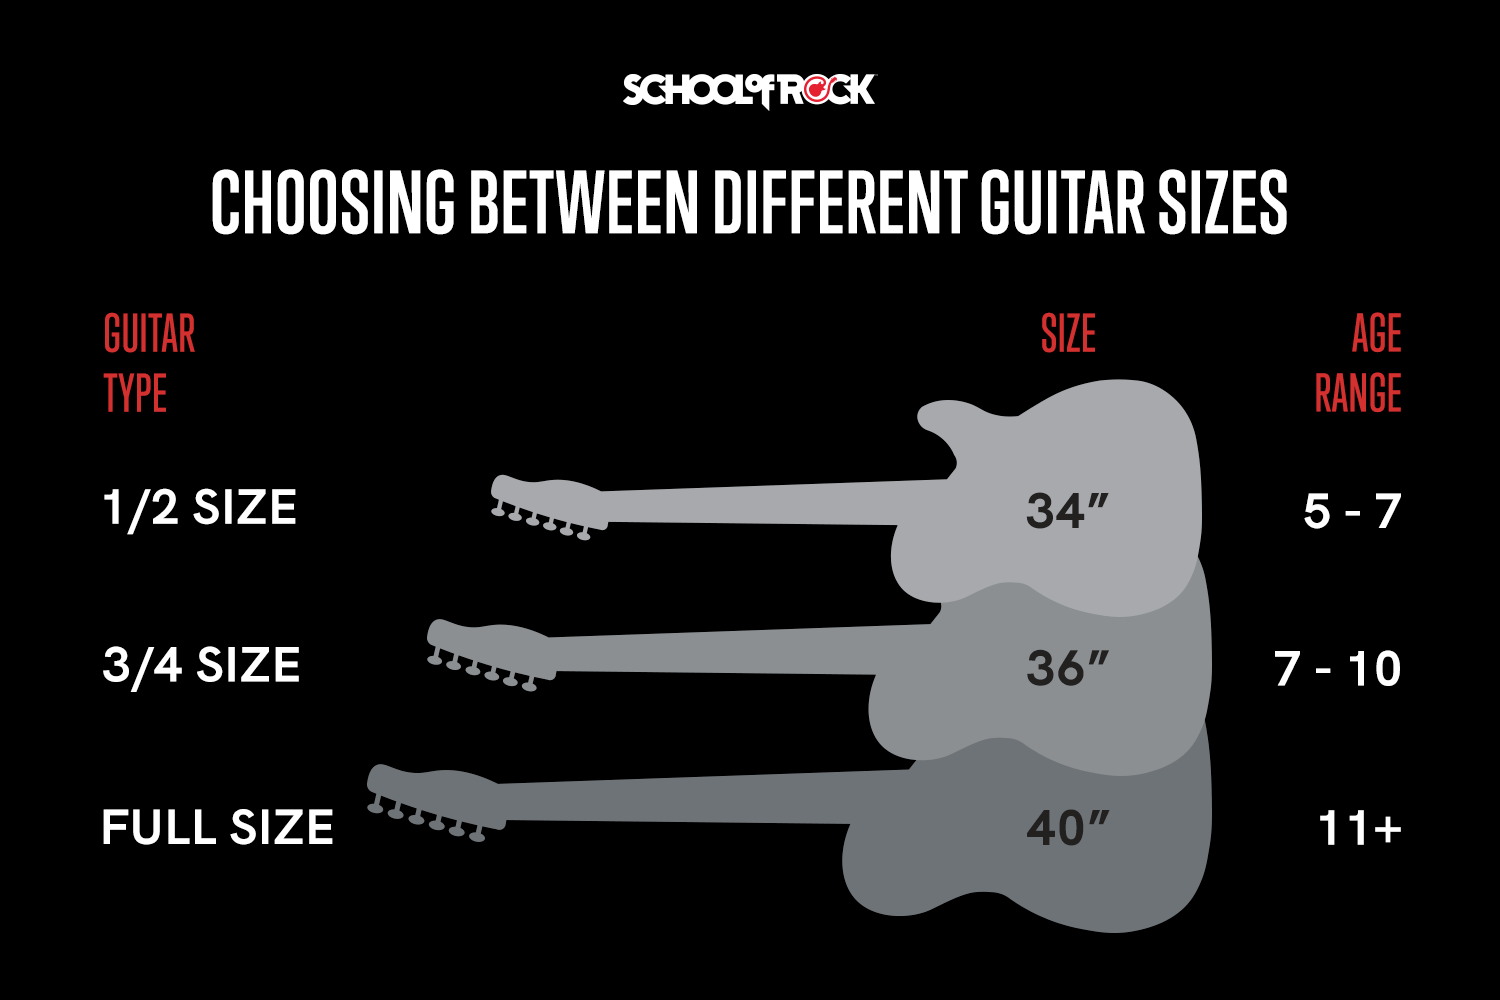 Guitar size guide chart